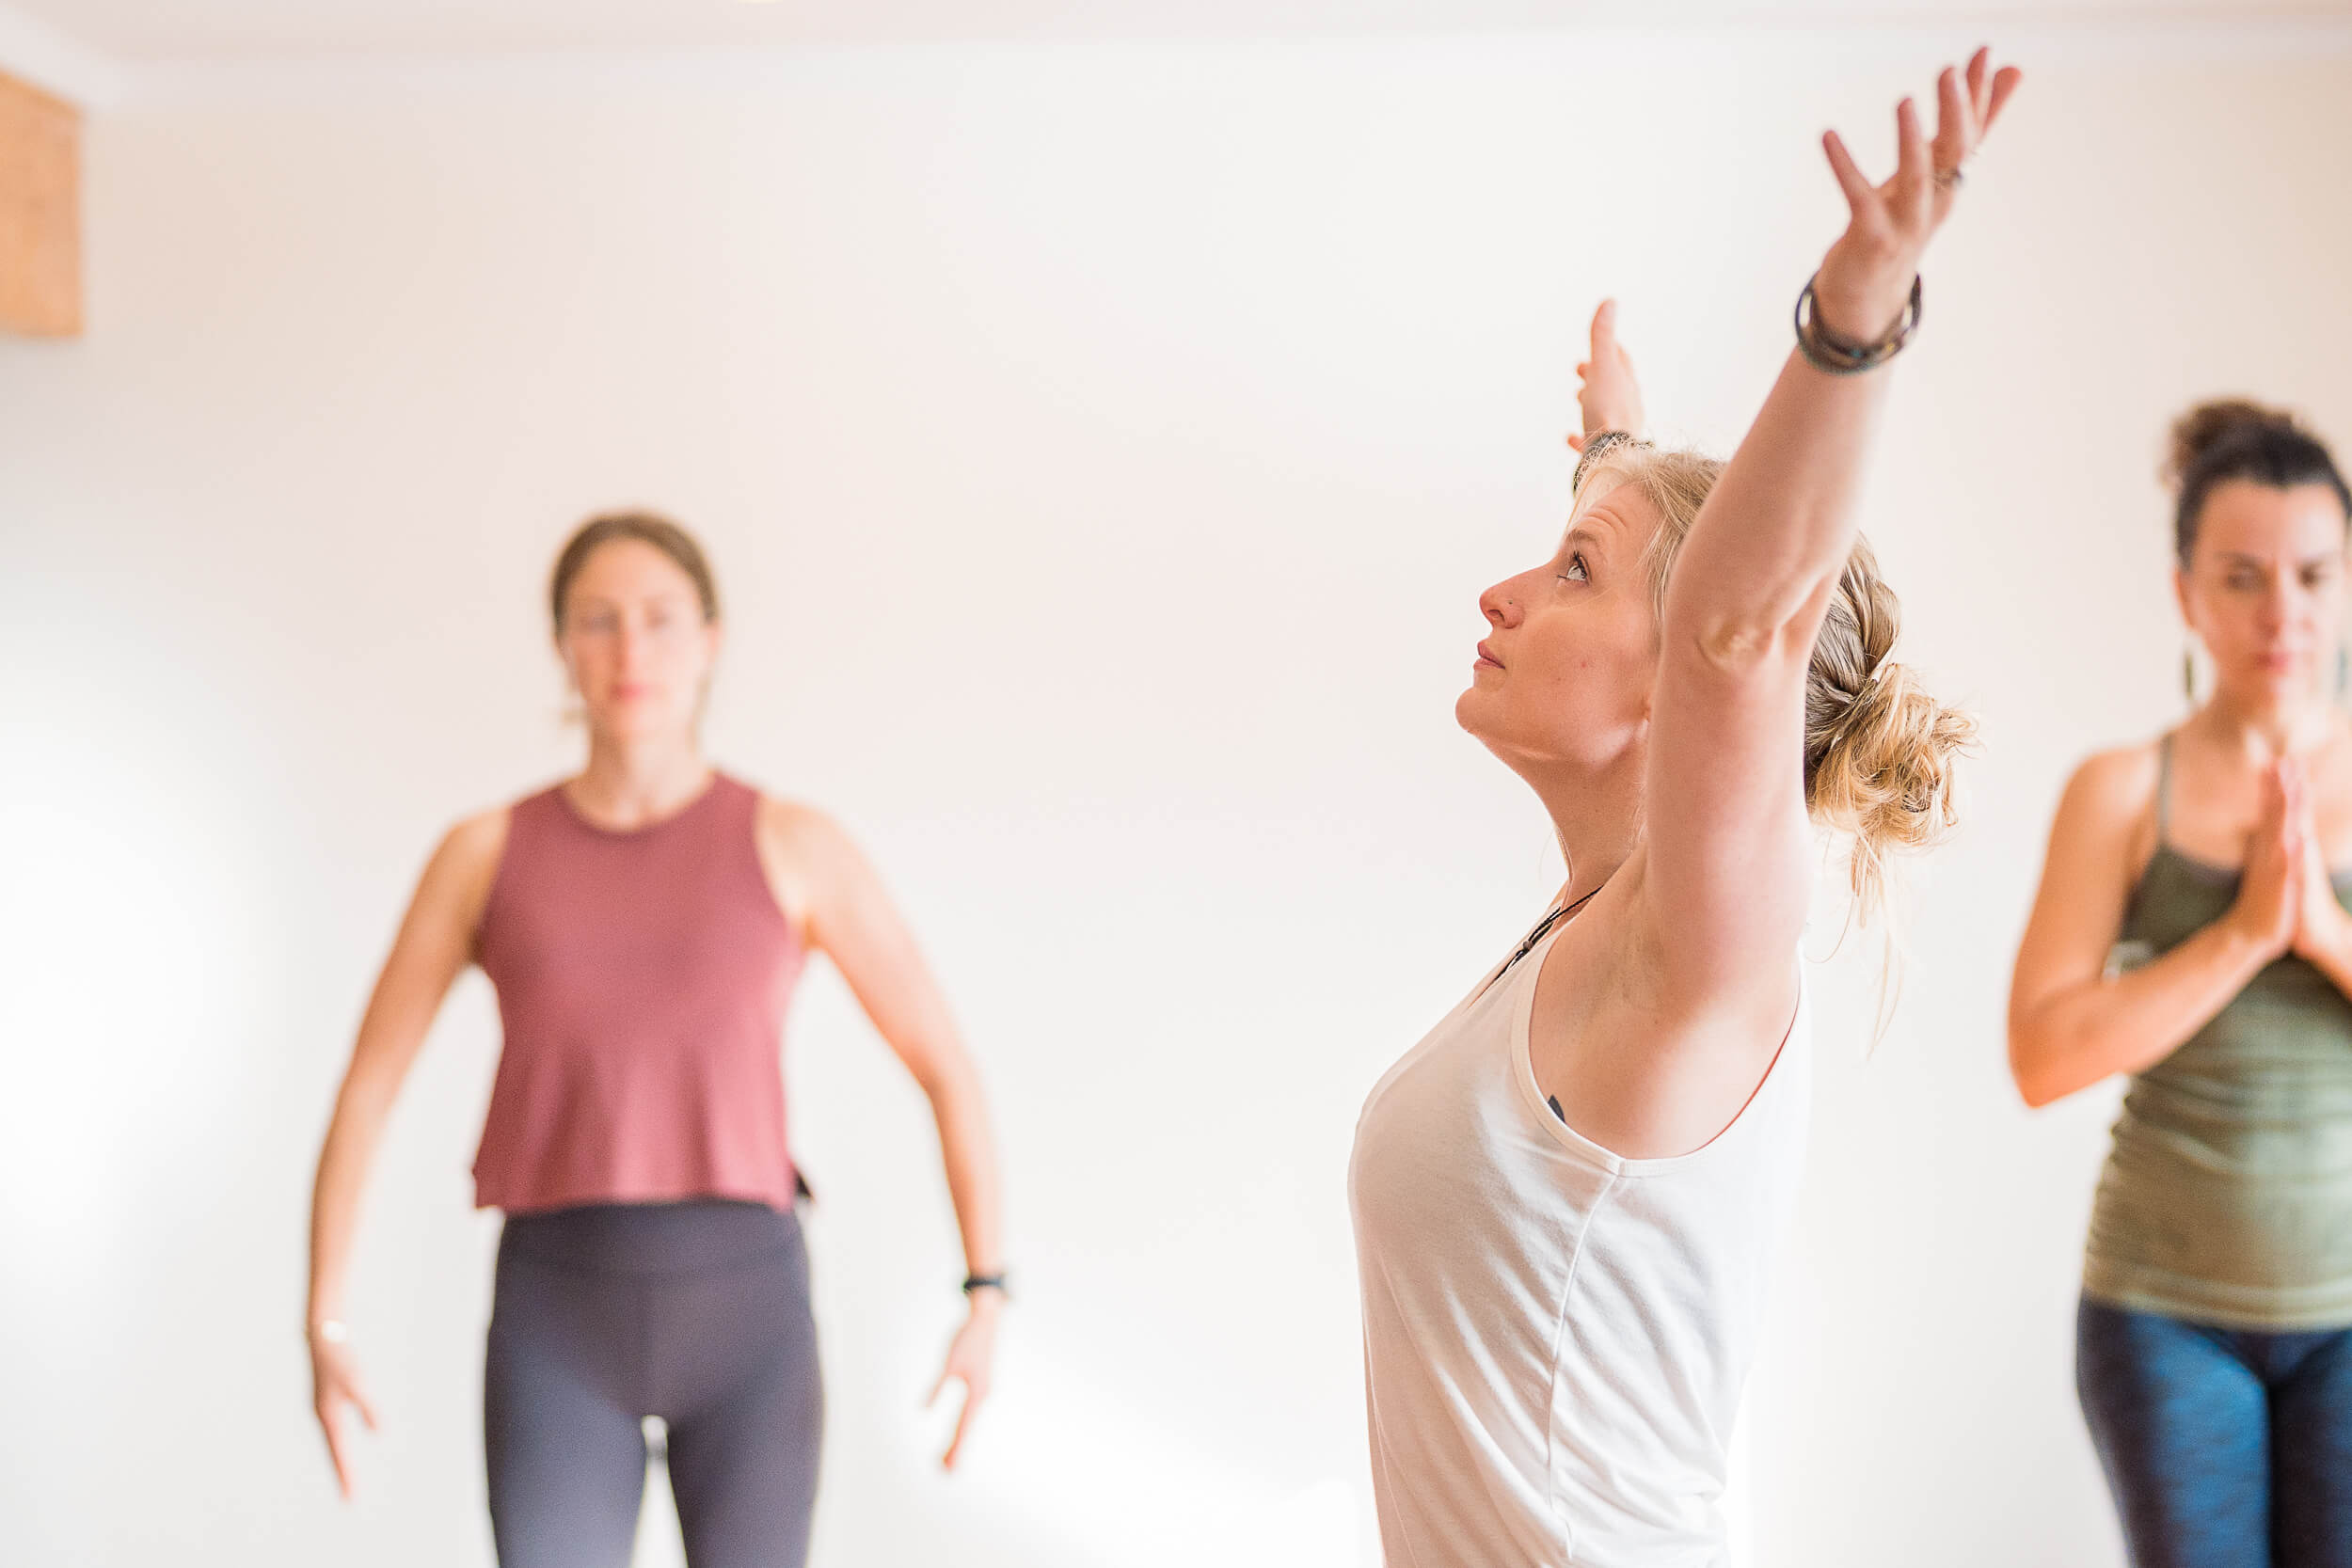 Focused yoga students at Shala Yoga studio in Squamish performing a standing stretch with one arm raised, embodying balance and flexibility, while another participant practices Anjali Mudra in the background, showcasing the variety of poses in a yoga sequence.